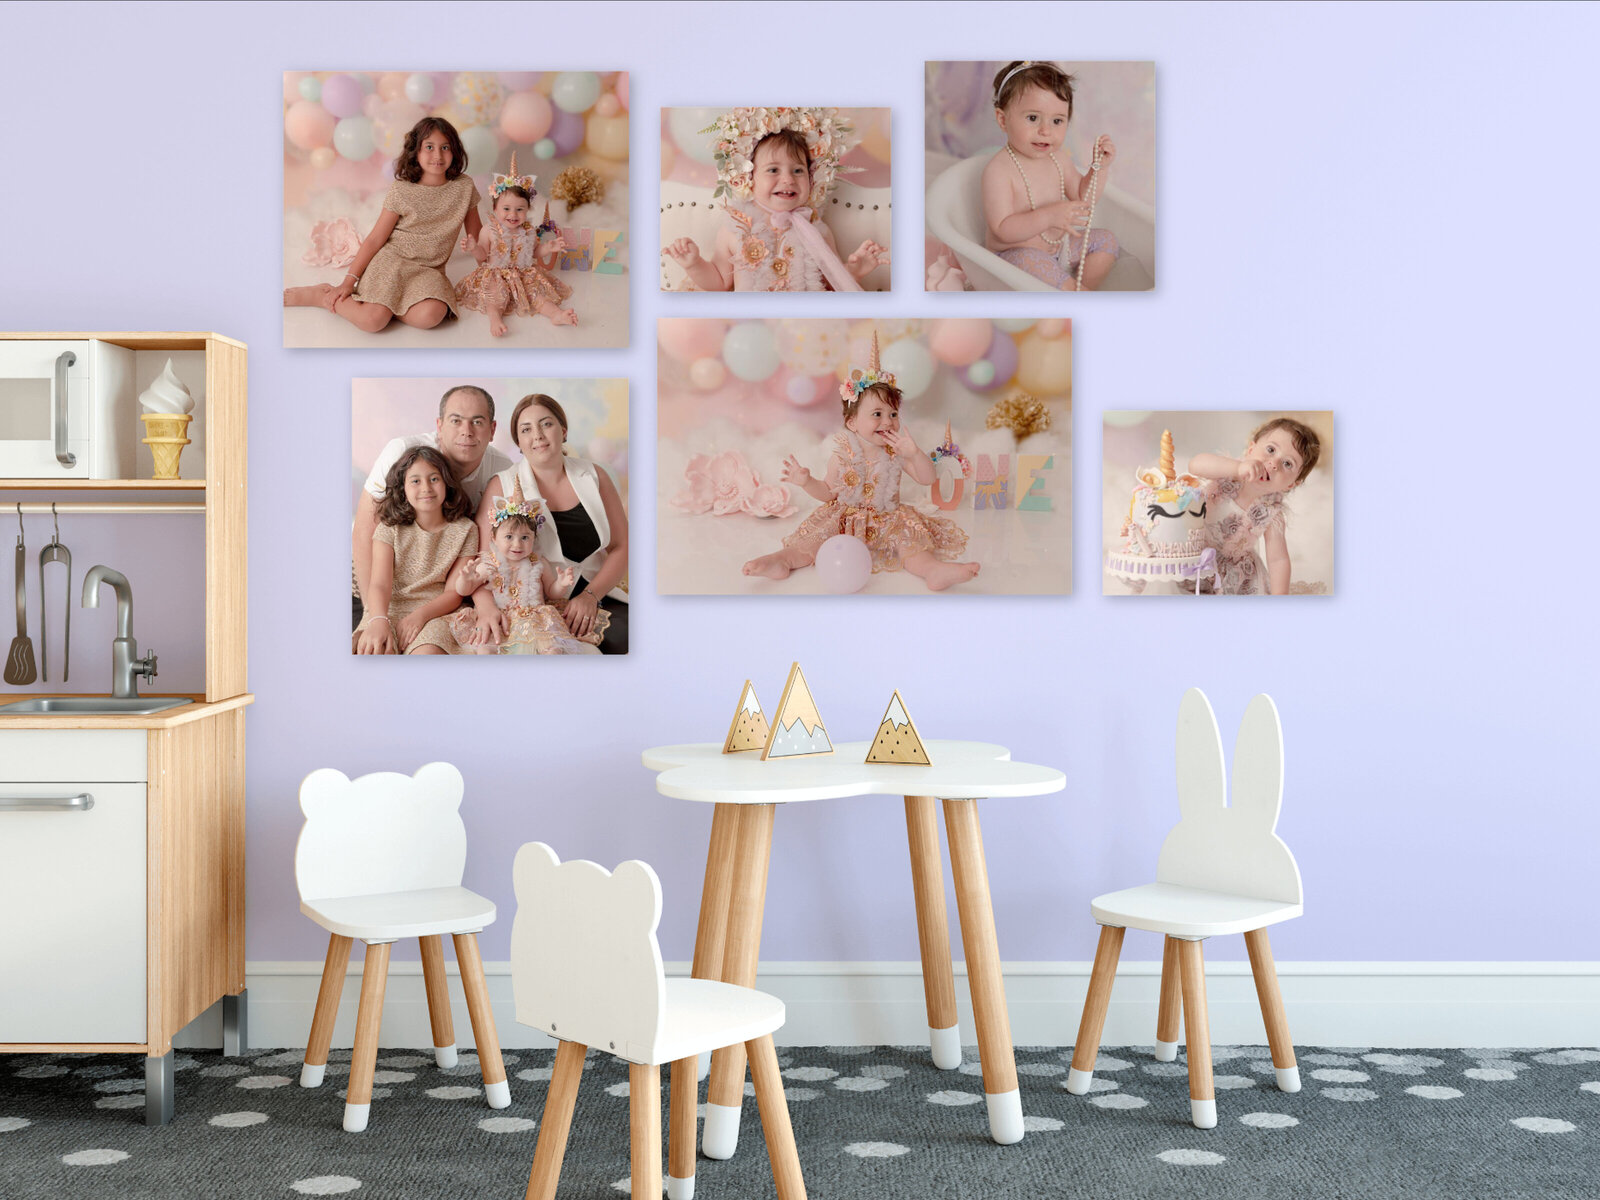 Baby portraits hanging on the wall in a client's home.